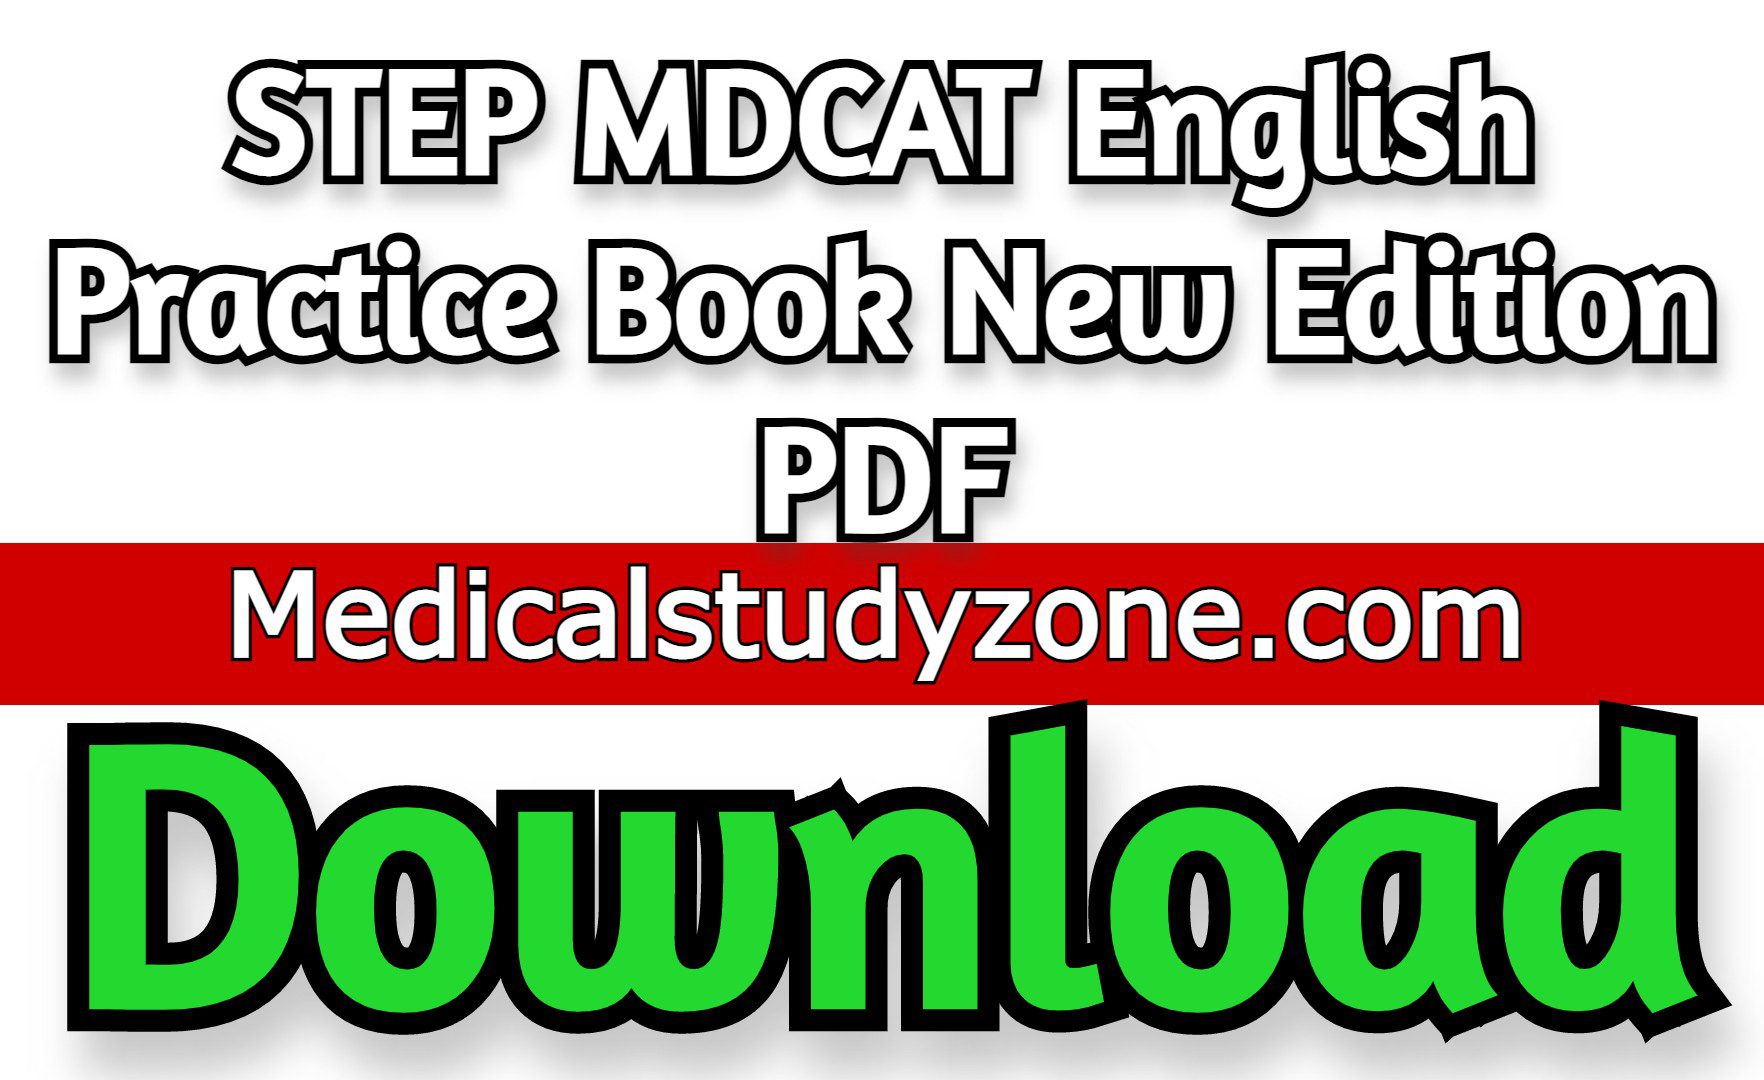 STEP MDCAT English Practice Book New Edition 2021 PDF Free Download